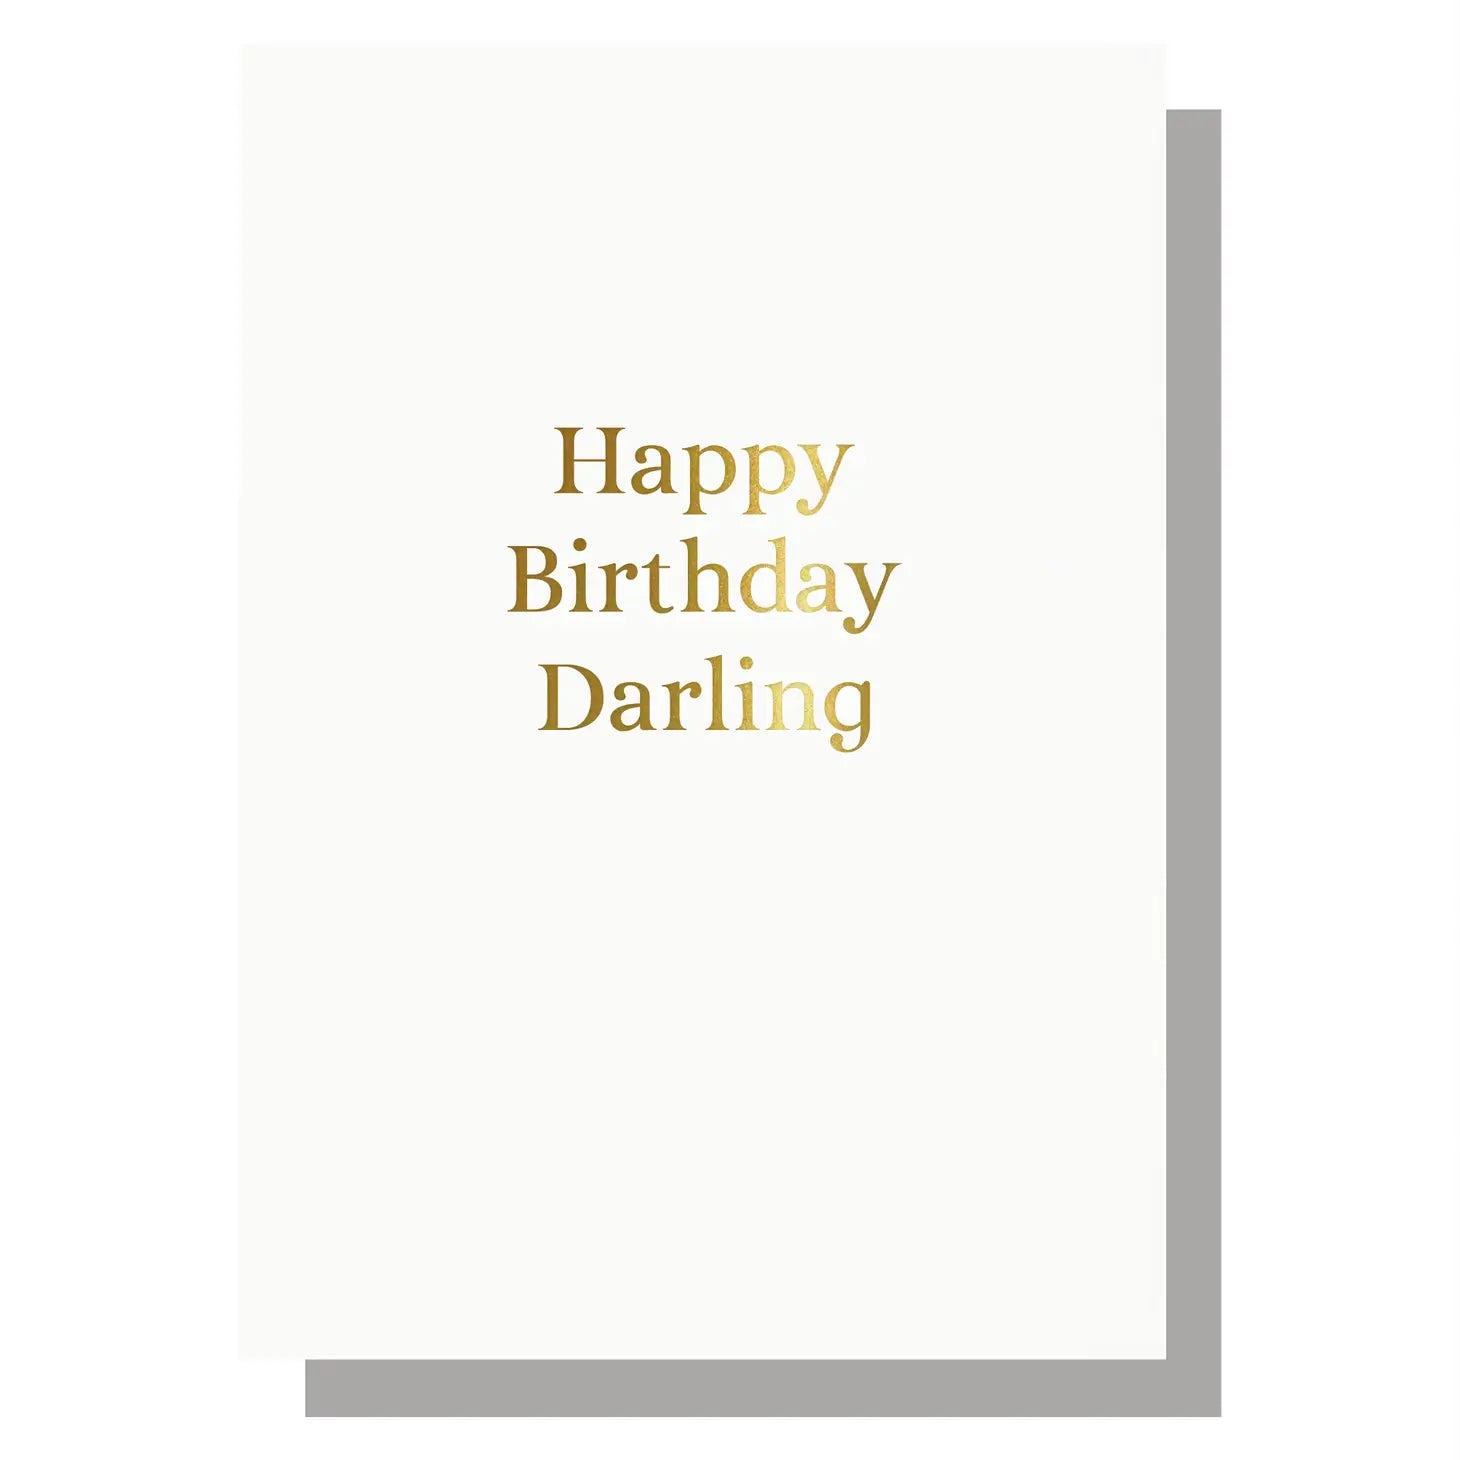 HAPPY BIRTHDAY DARLING | CARD BY LUCKY INK